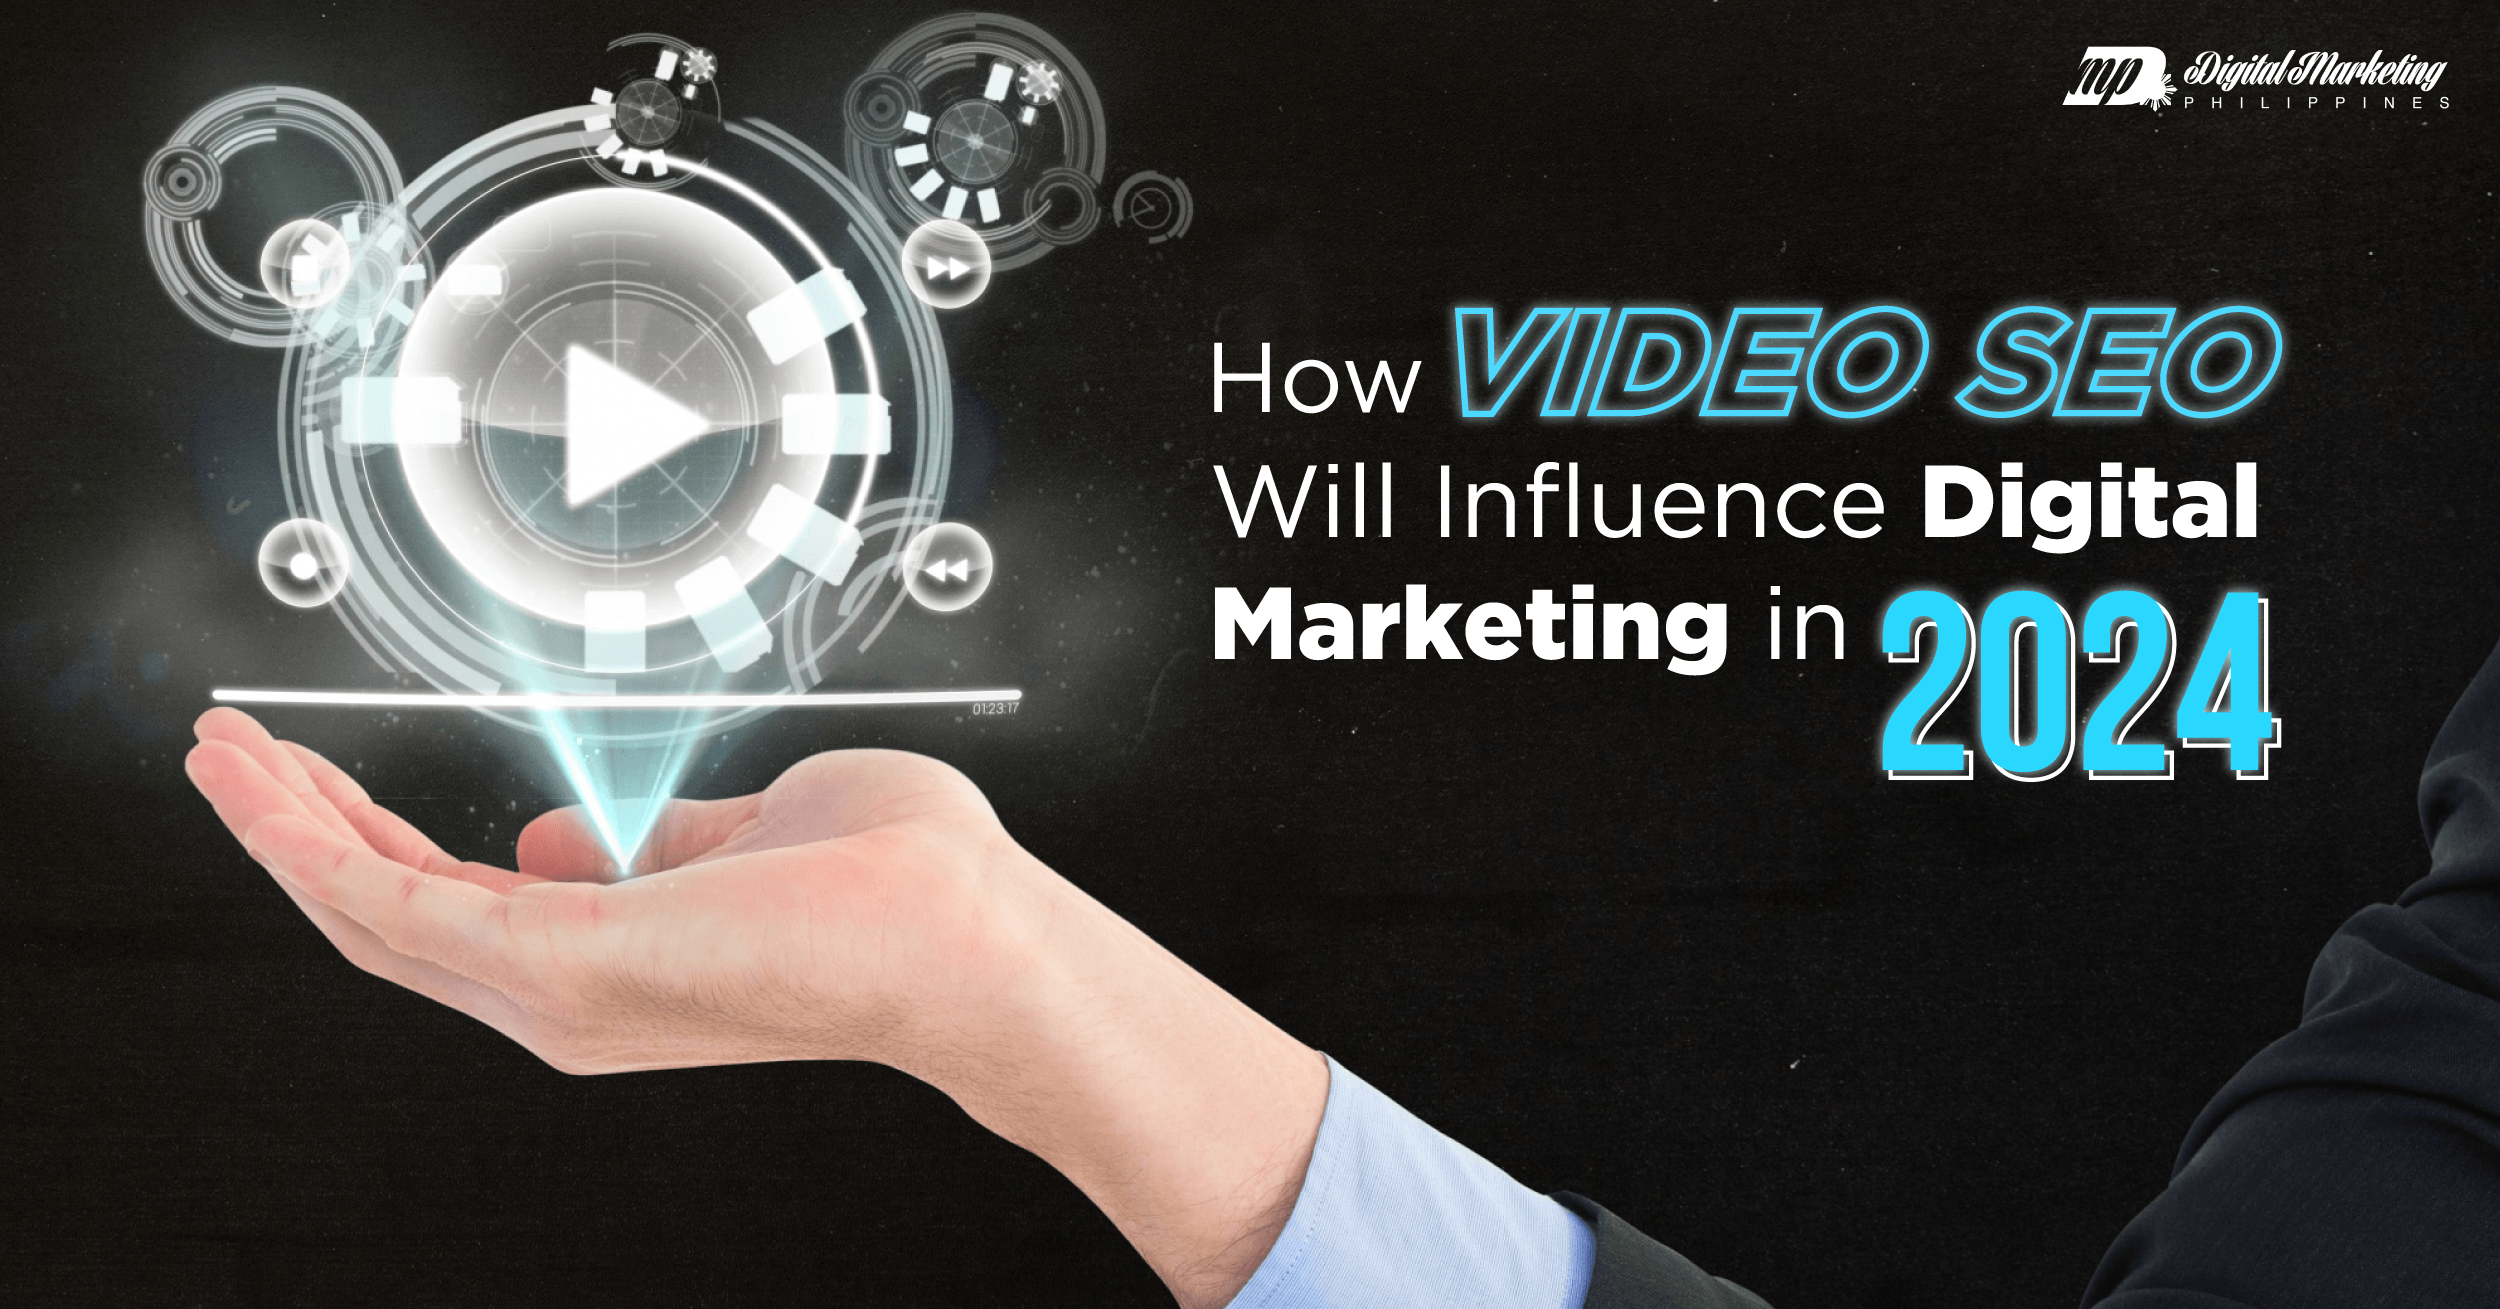 How Video SEO Will Influence Digital Marketing in 2024 featured image